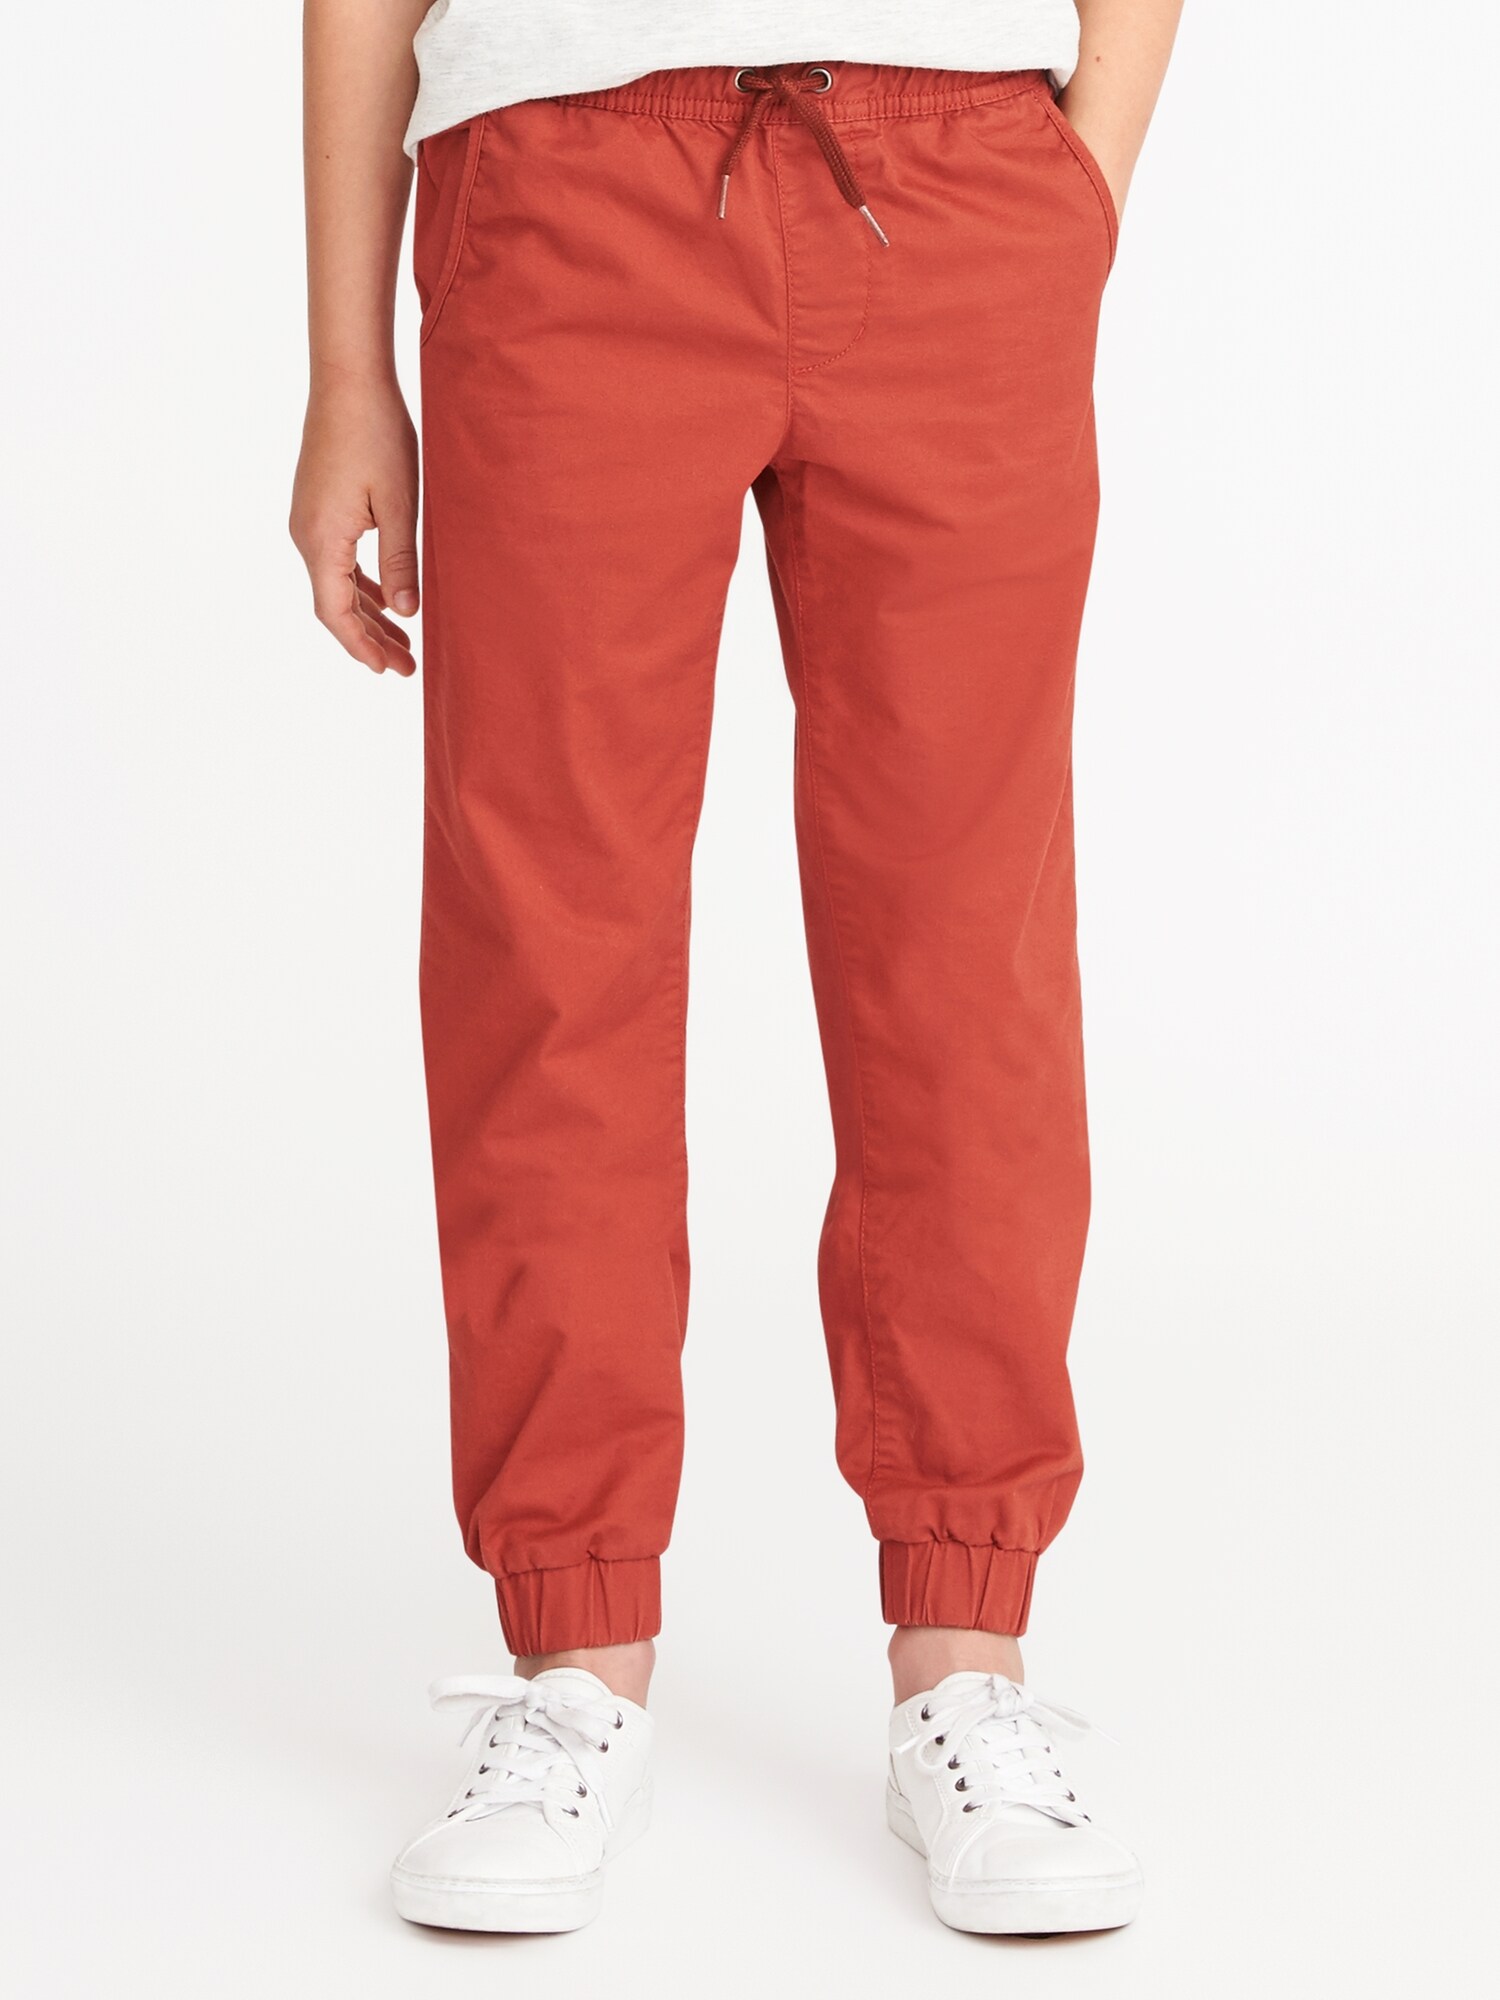 Old Navy - Built-In-Flex Twill Joggers For Boys